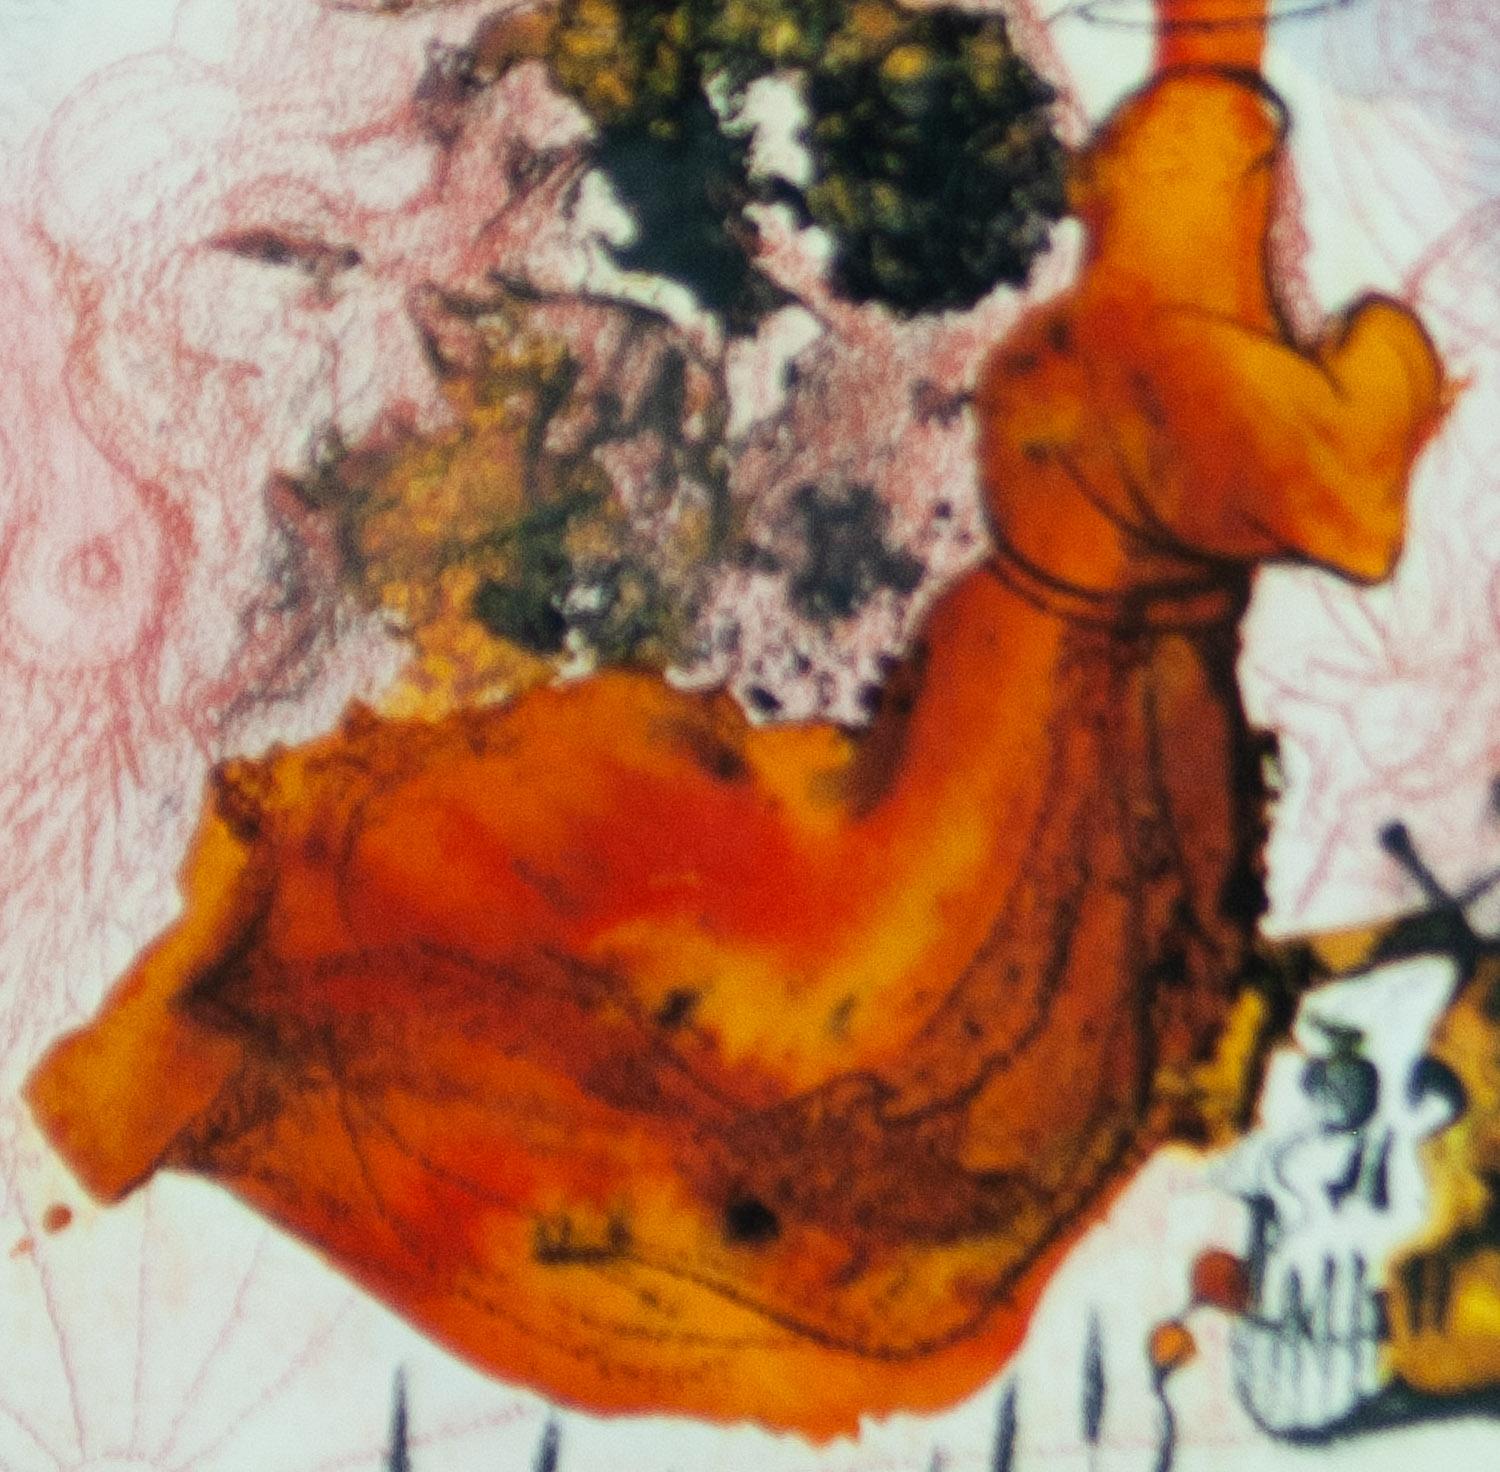 Elijah by a Whirlwind on a Chariot of Fire from Biblia Sacra by Salvador Dali - Print by Salvador Dalí